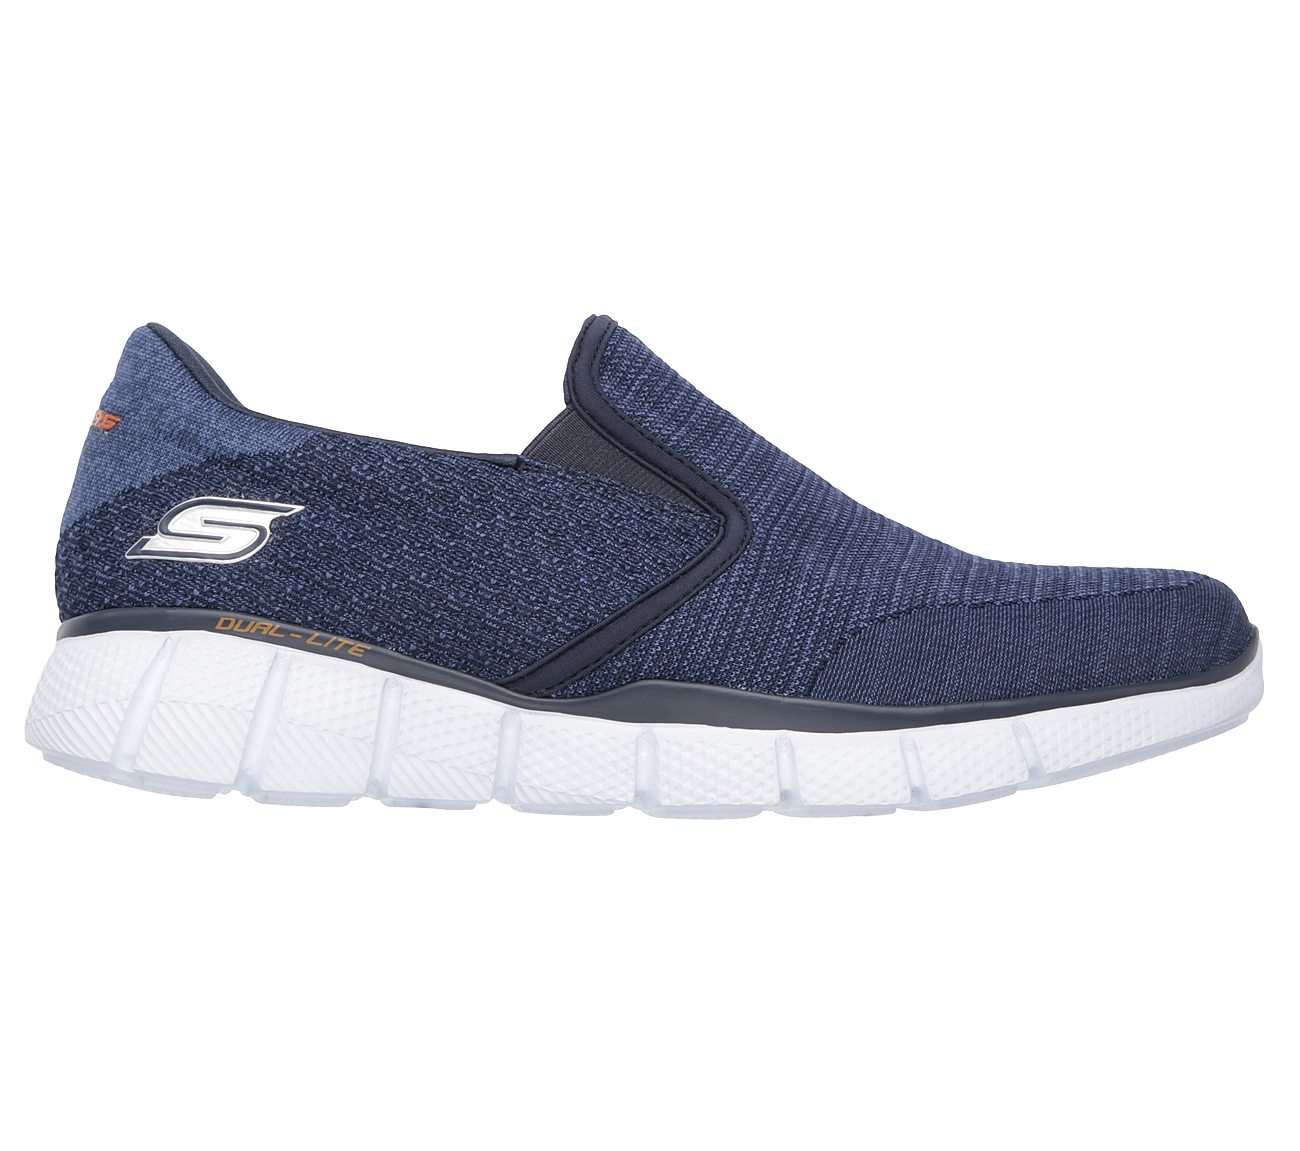 skechers equalizer 2.0 mens trainers